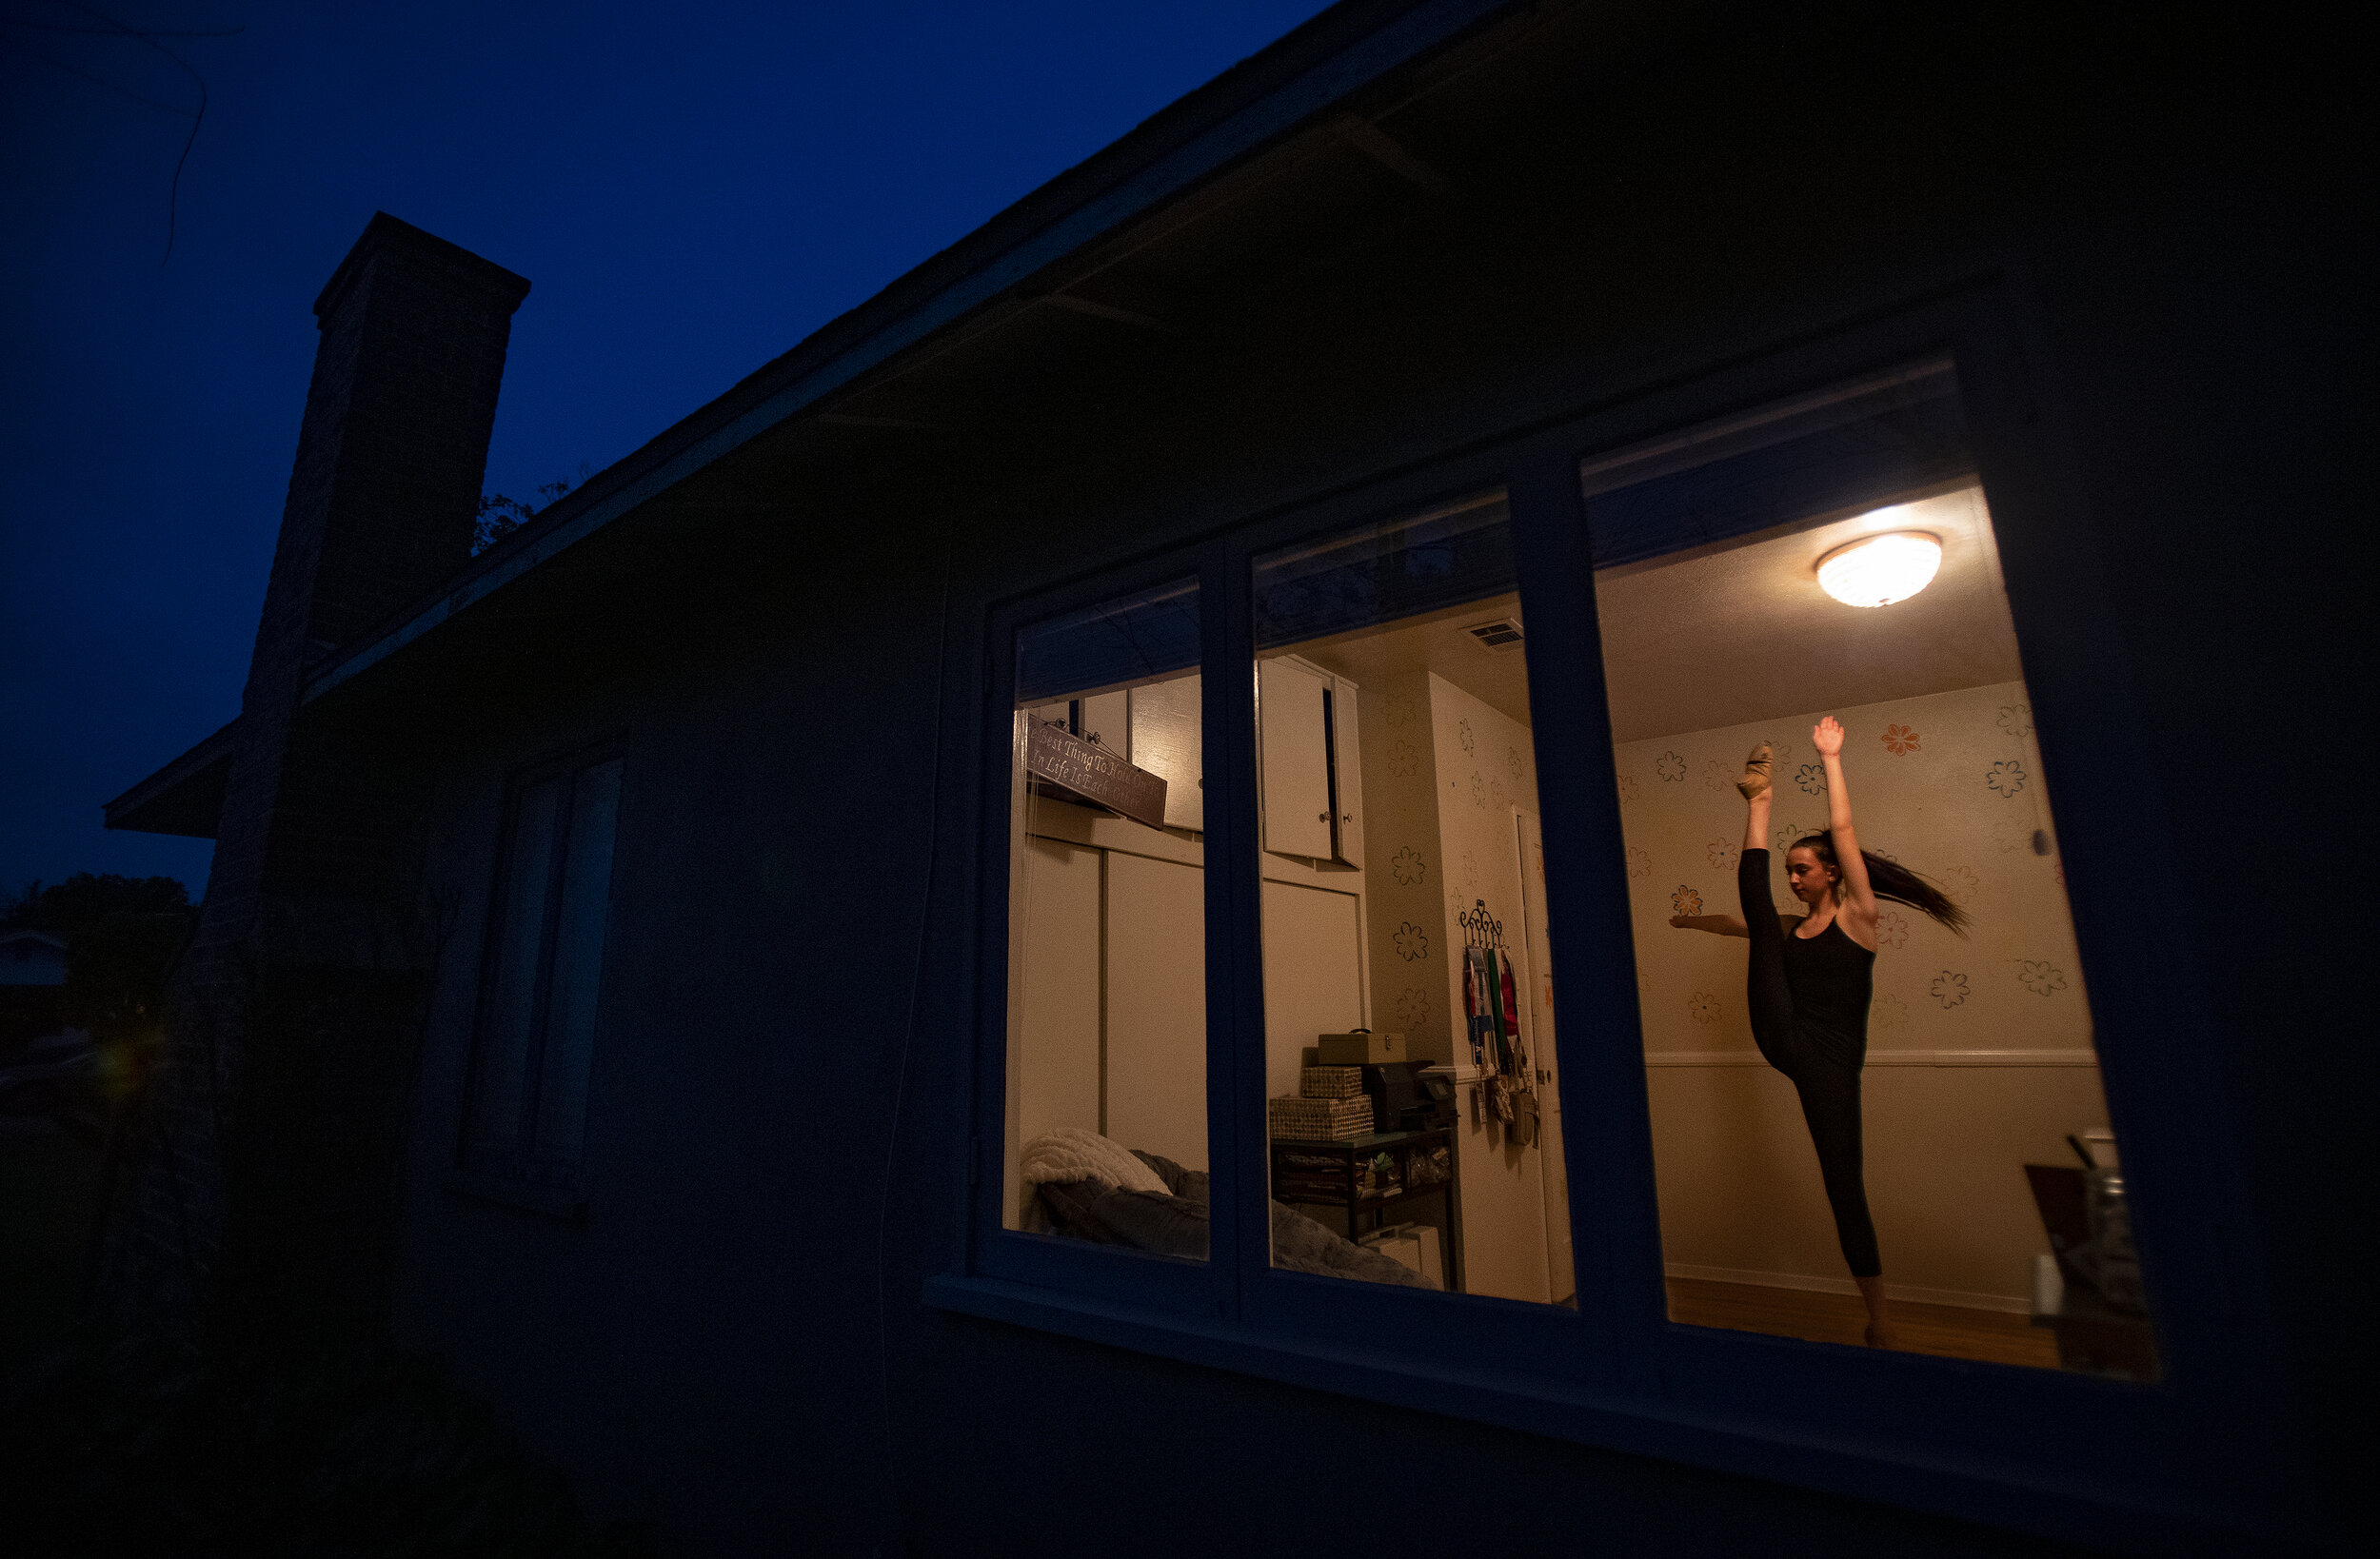  RIVERSIDE, CA - MARCH 31, 2020: Grace Carter,15 of Riverside practices her dance routine in the isolation of her bedroom since her dance classes and school were canceled during the coronavirus pandemic on March 31, 2020 in Riverside, California. On 